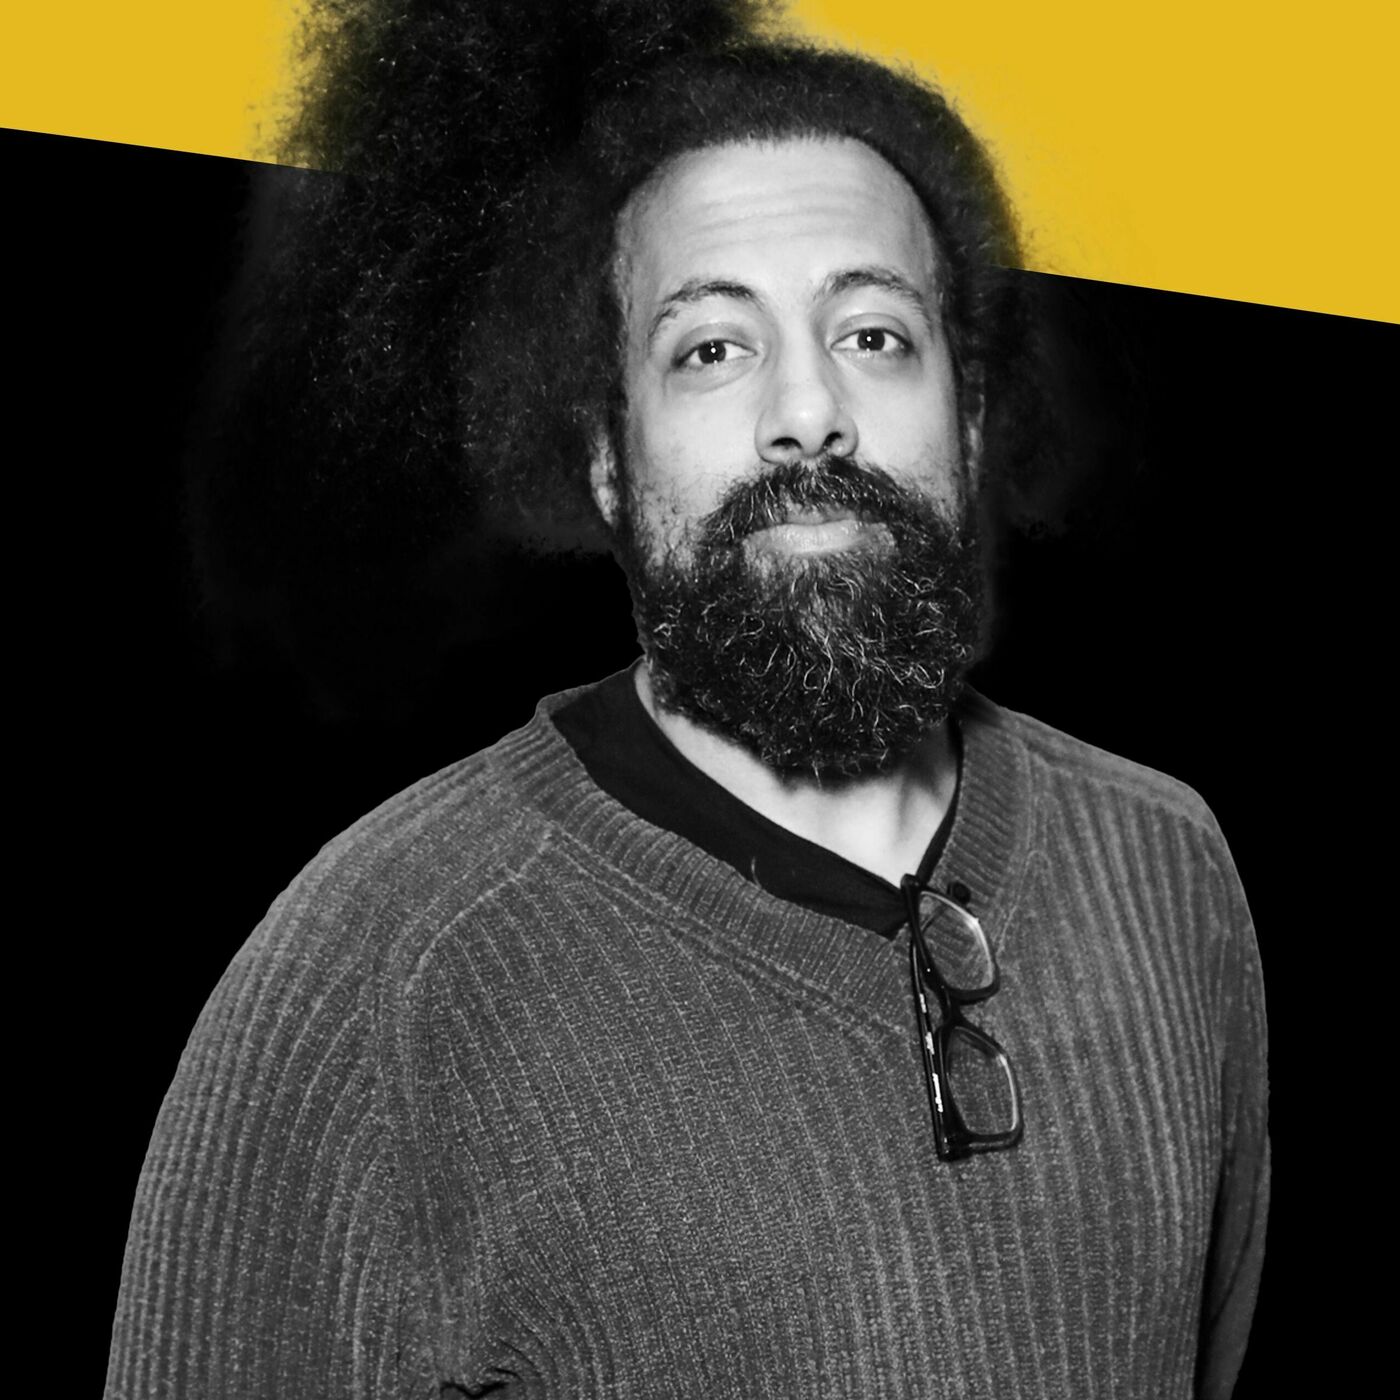 Reggie Watts: Monty Python and the Holy Grail, Pink Floyd's The Wall and The Matrix